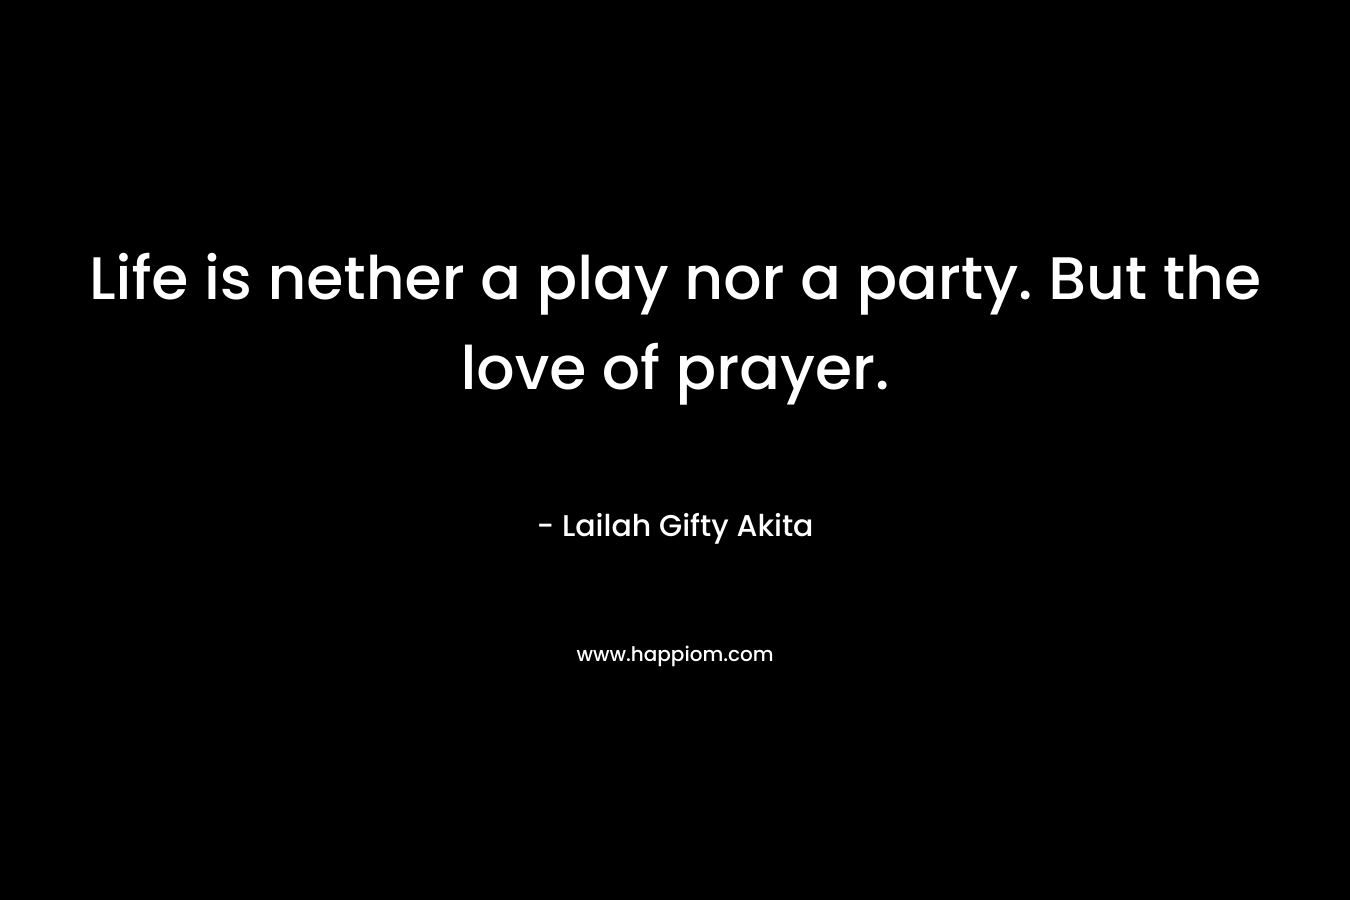 Life is nether a play nor a party. But the love of prayer.